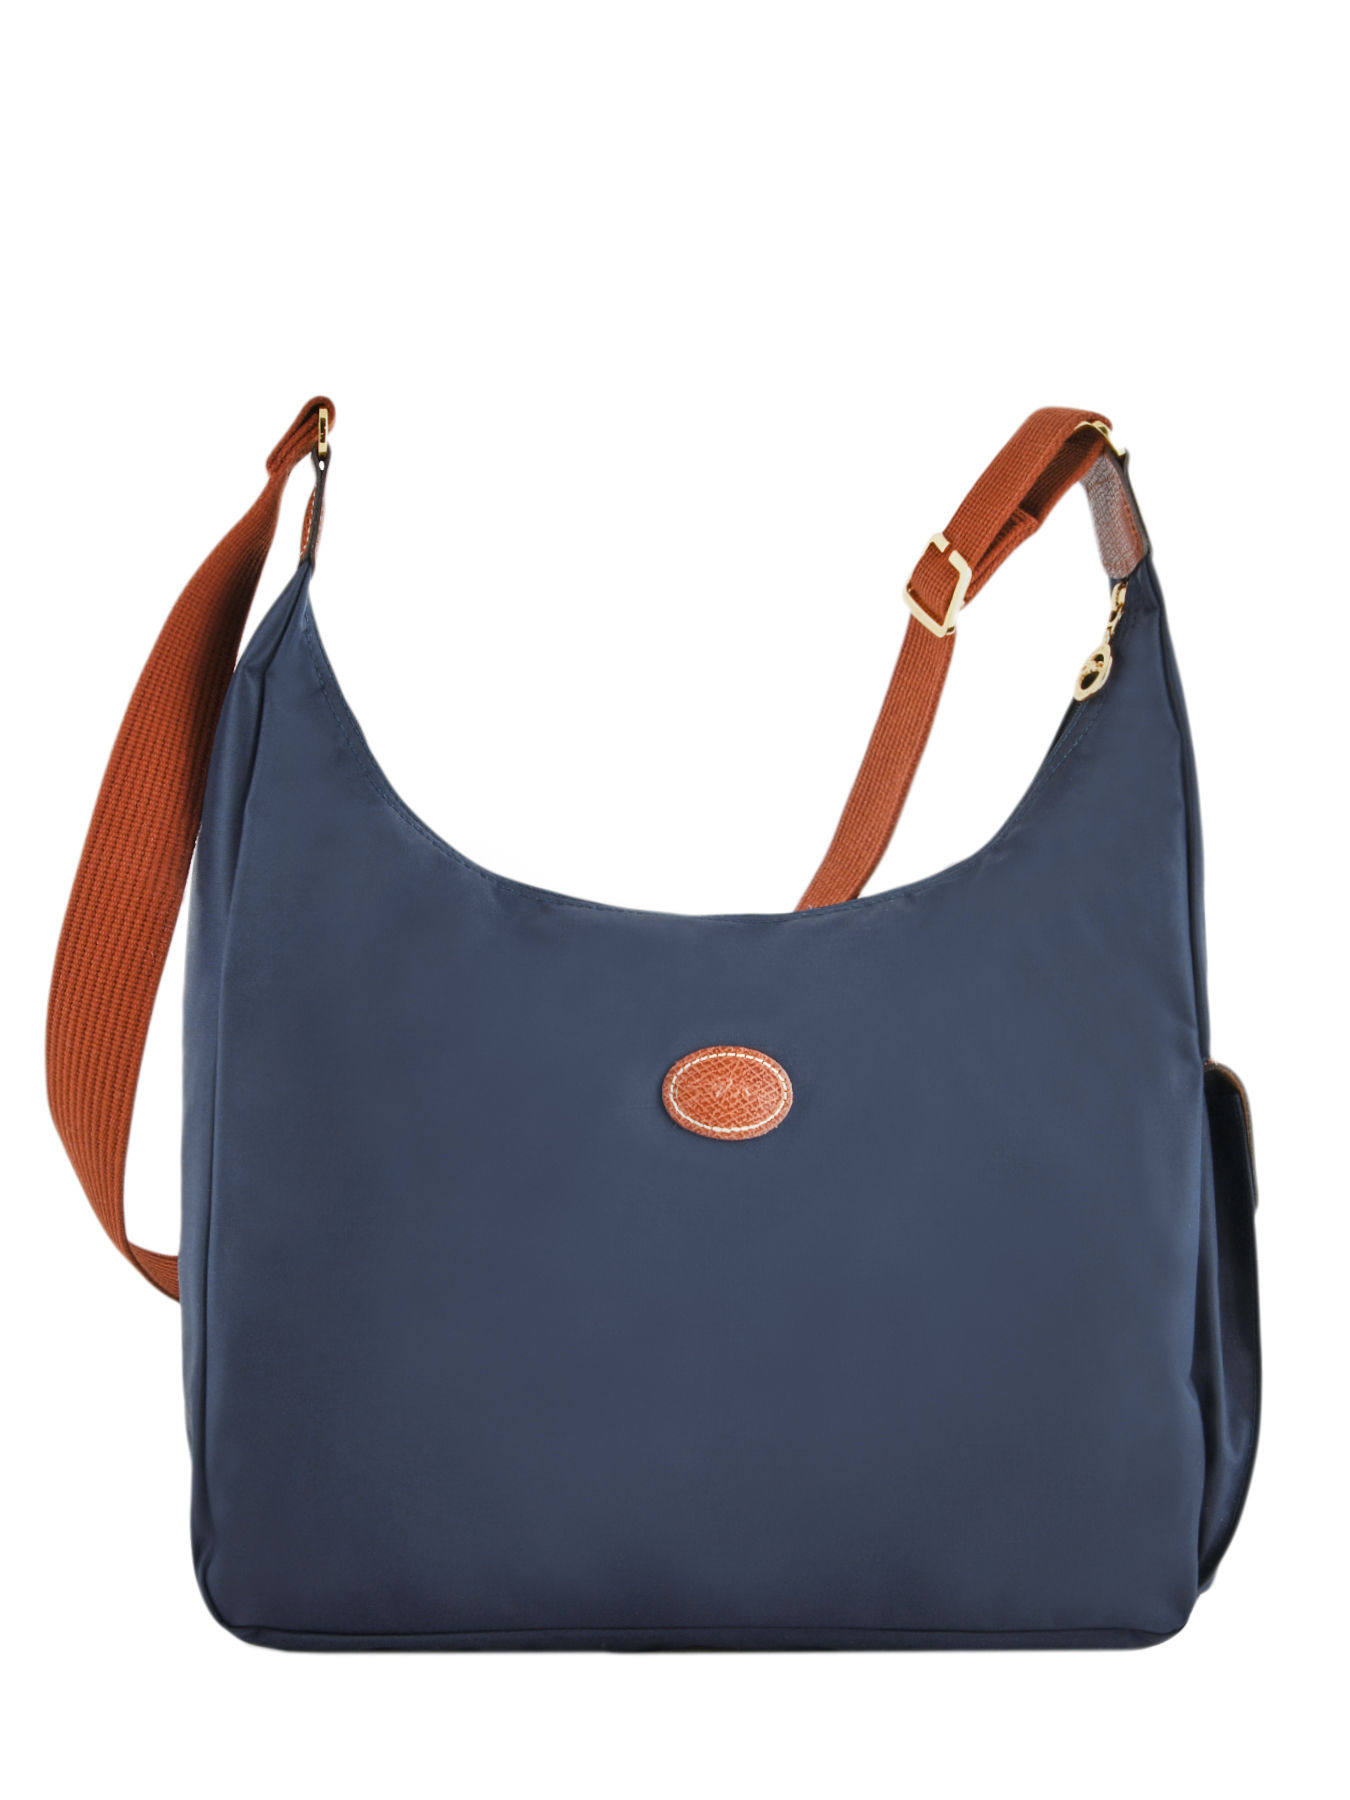 Shopping > longchamp sac toile, Up to 67% OFF